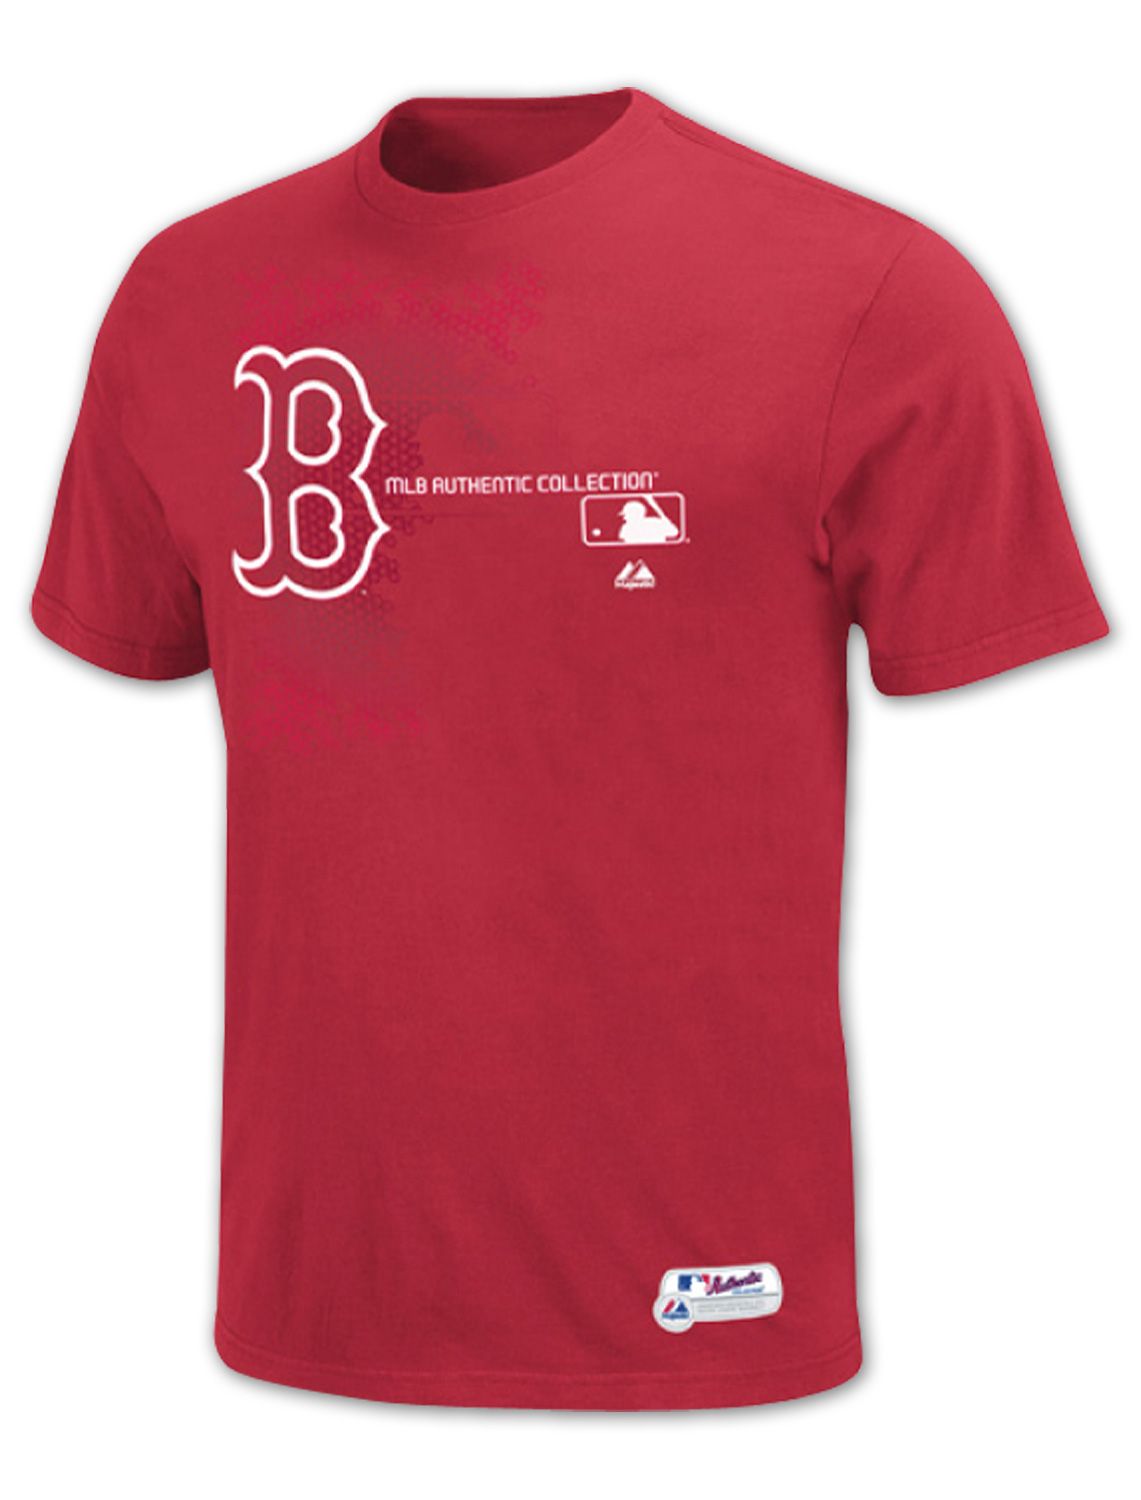 Majestic MLB Authentic Game Changer Tee